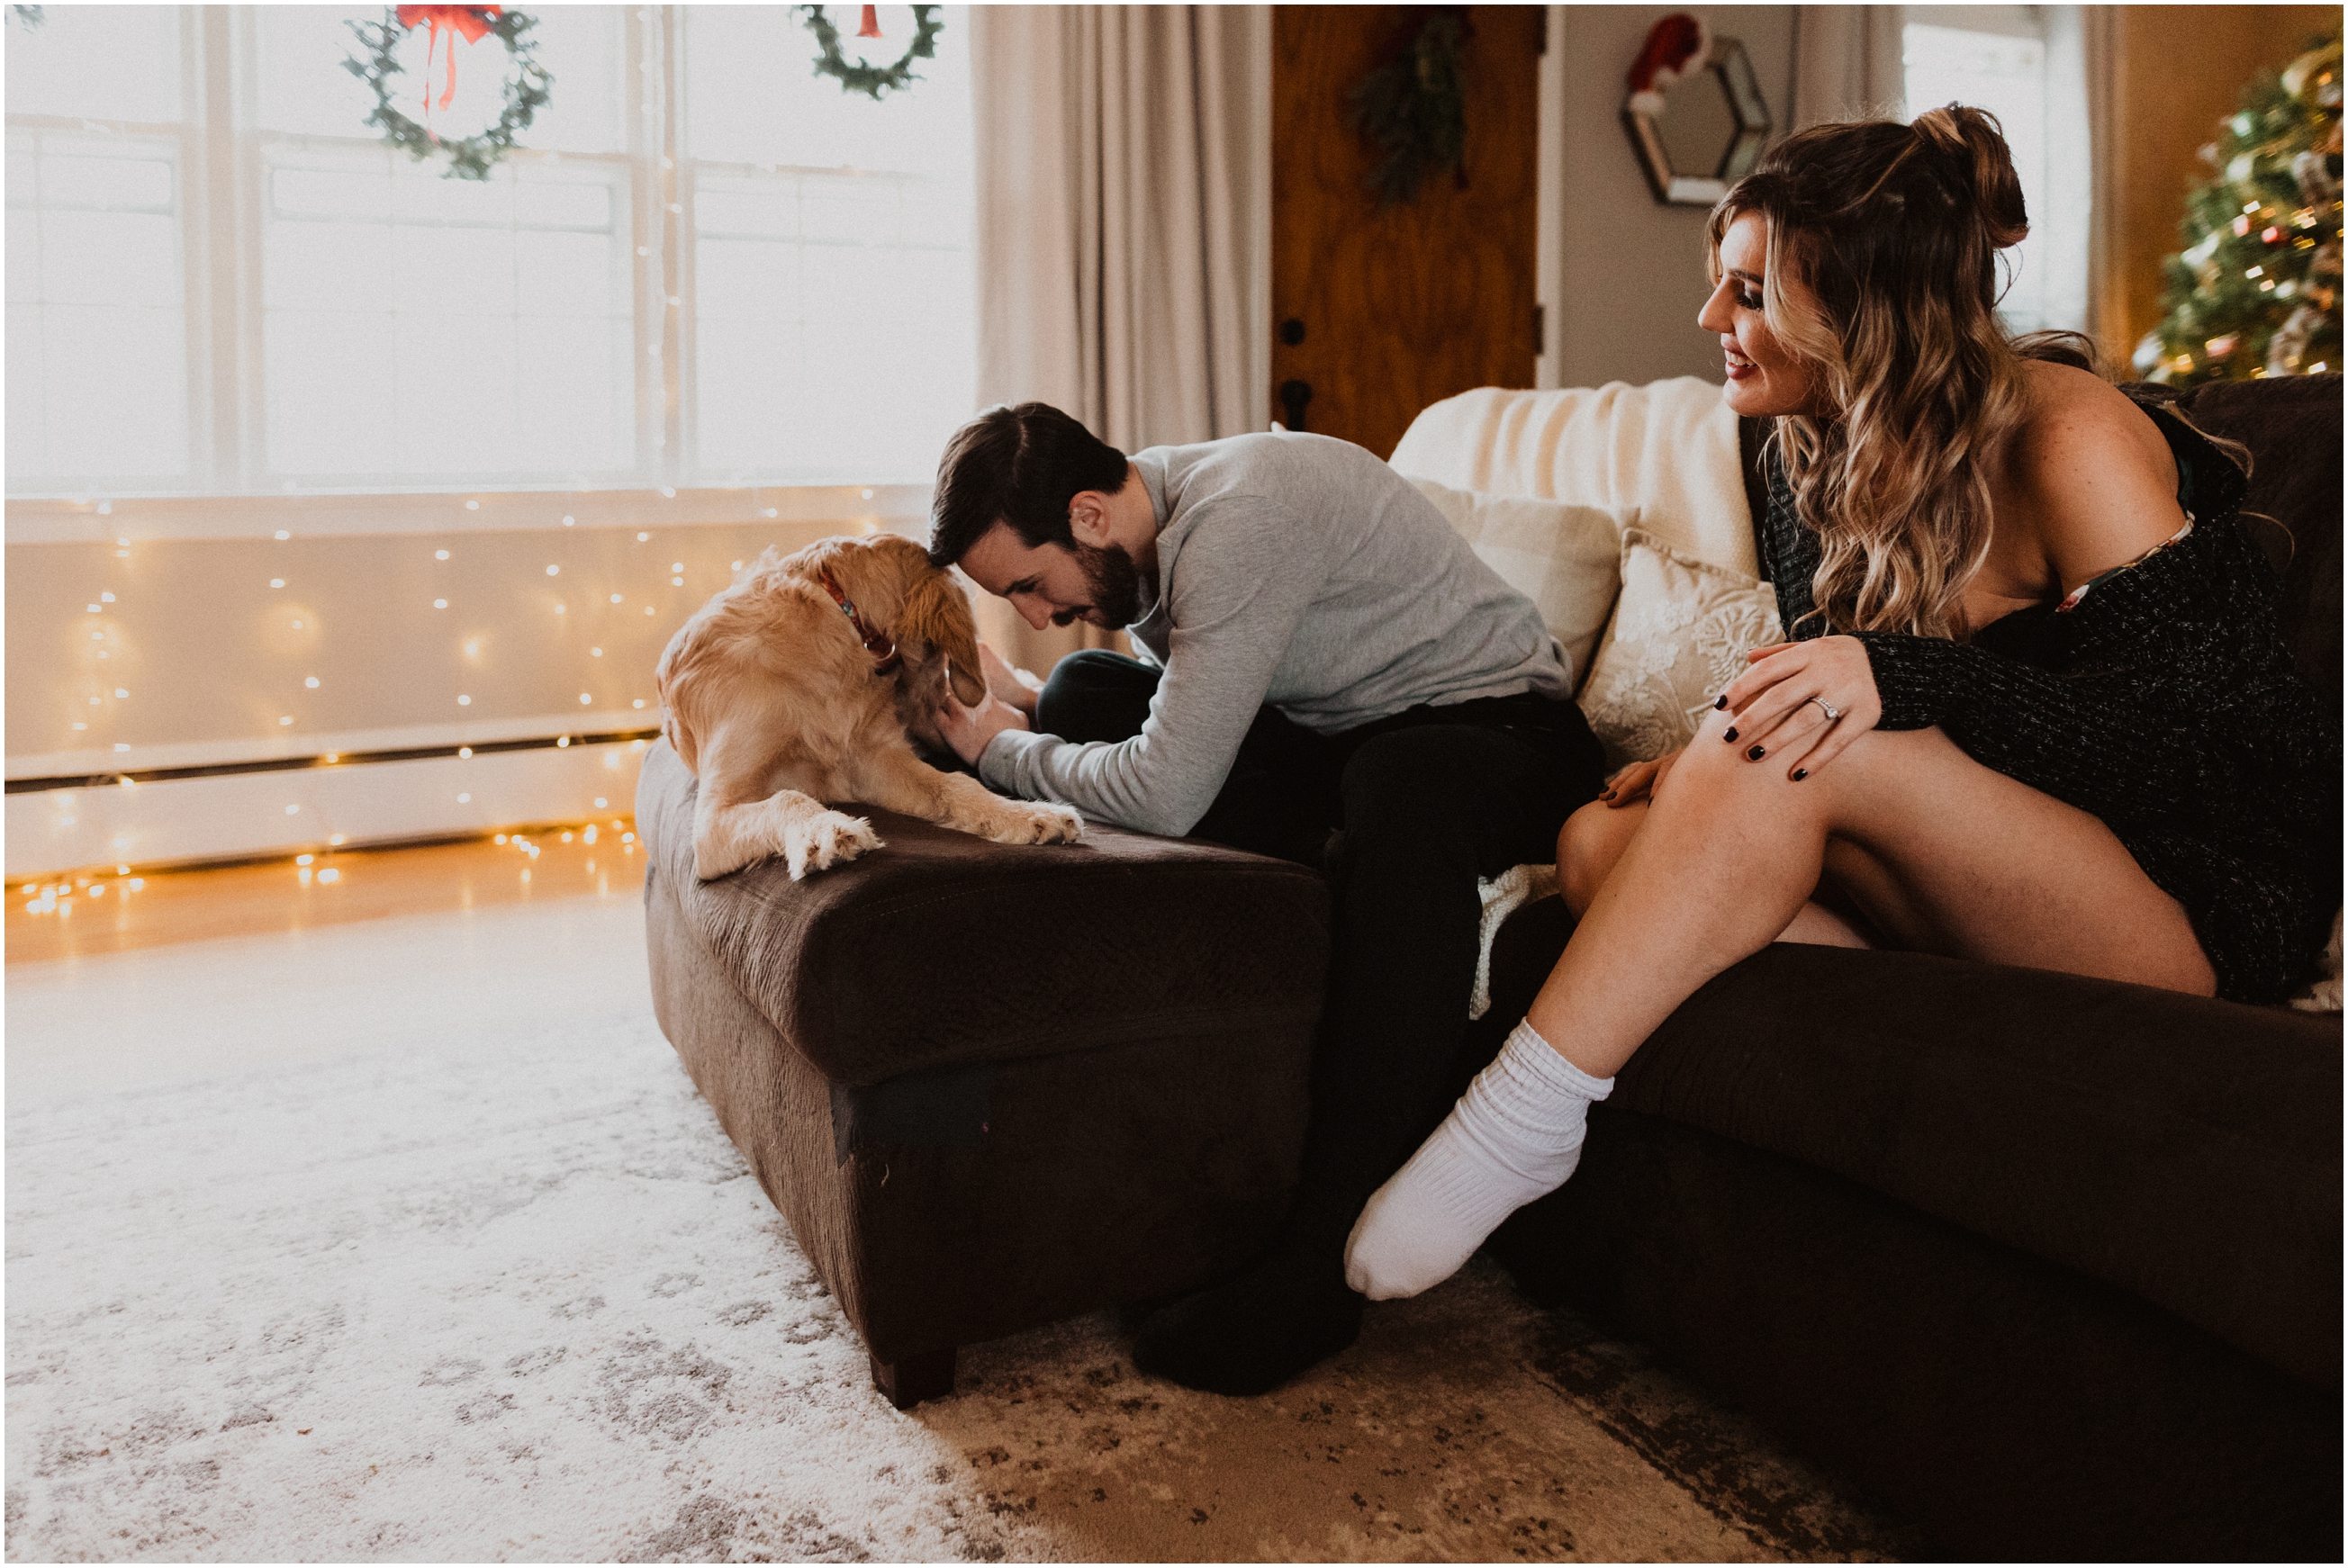 Christmas In Home Holiday Dog Cat Anniversary New Jersey Engagement Session Adventurous Married Engaged Couples NJ Wedding Photographer